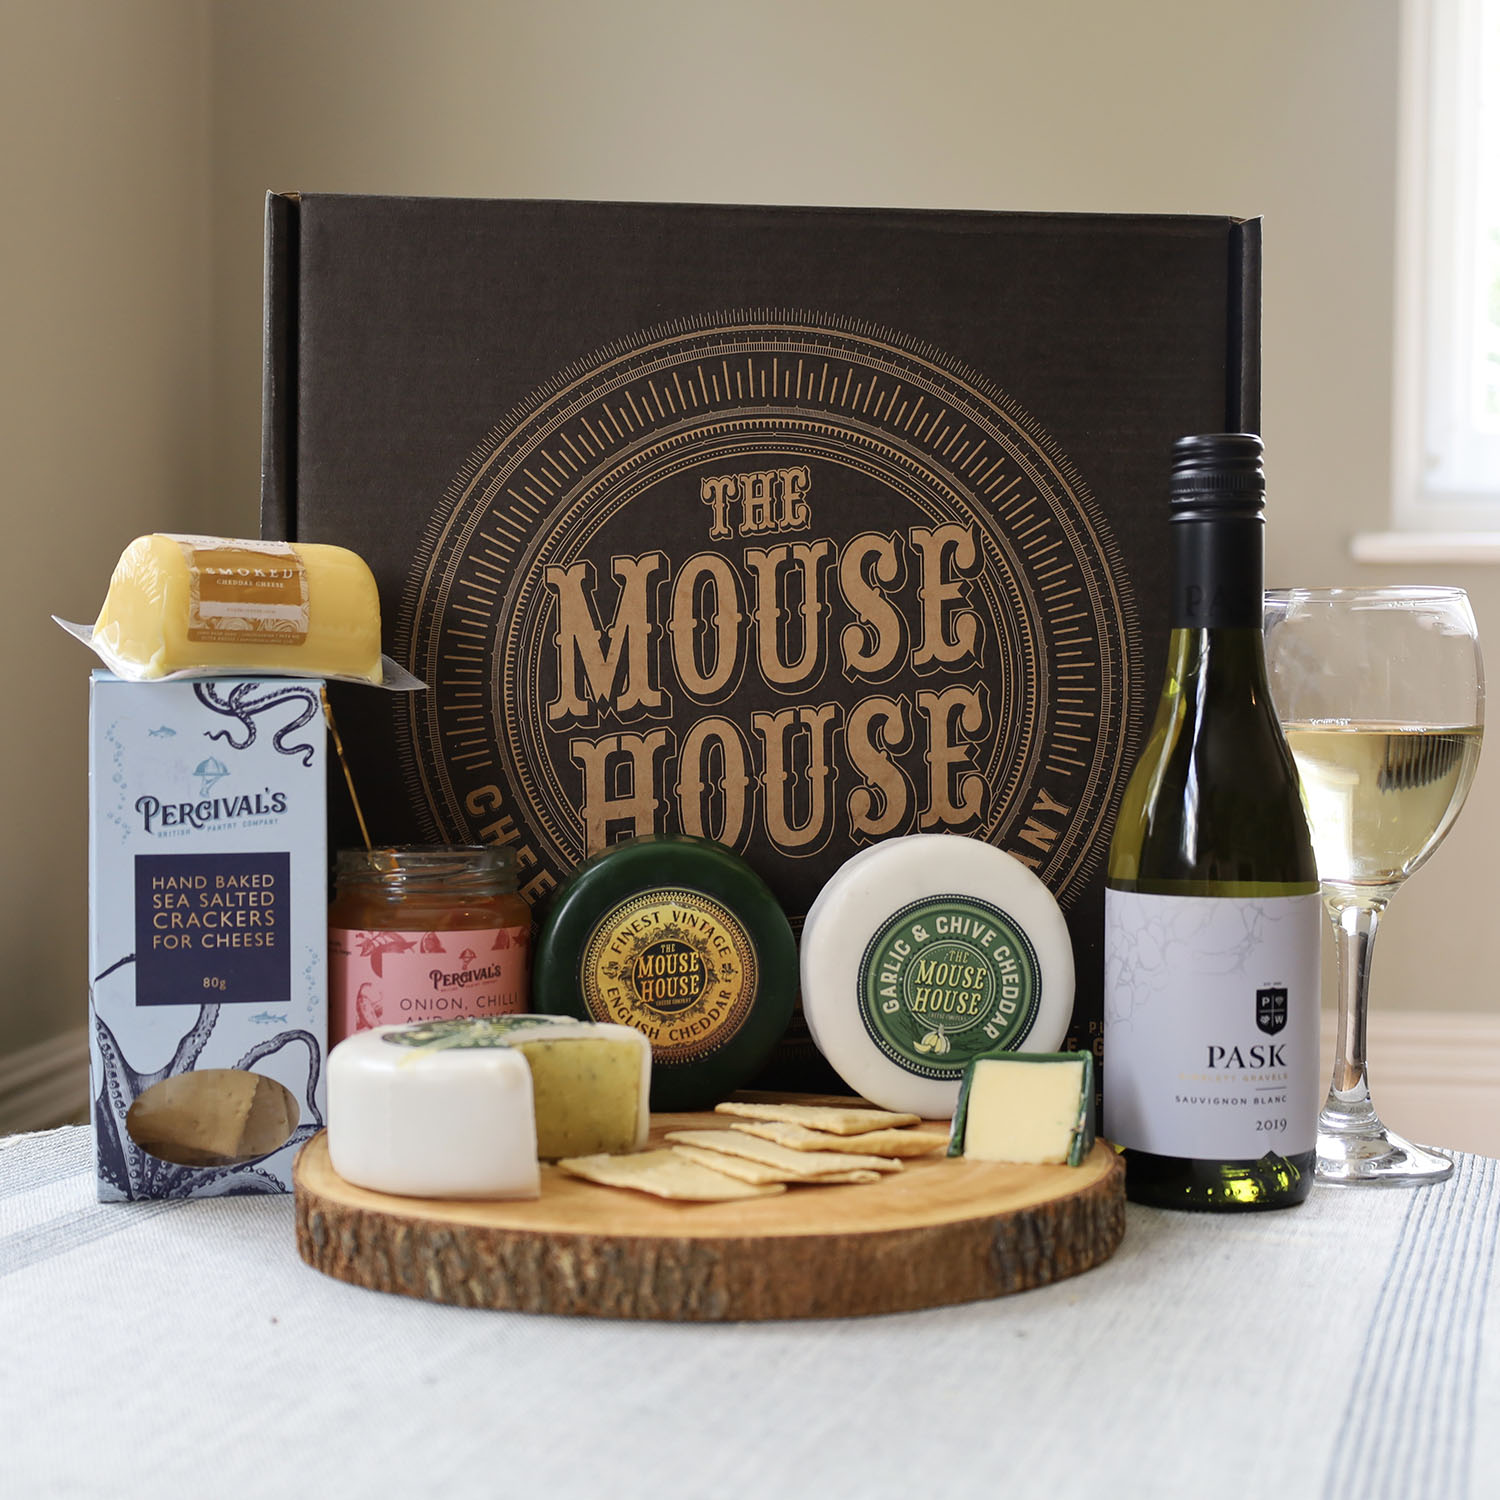 Christmas at The Mouse House - The Mouse House Cheese & Hamper Company